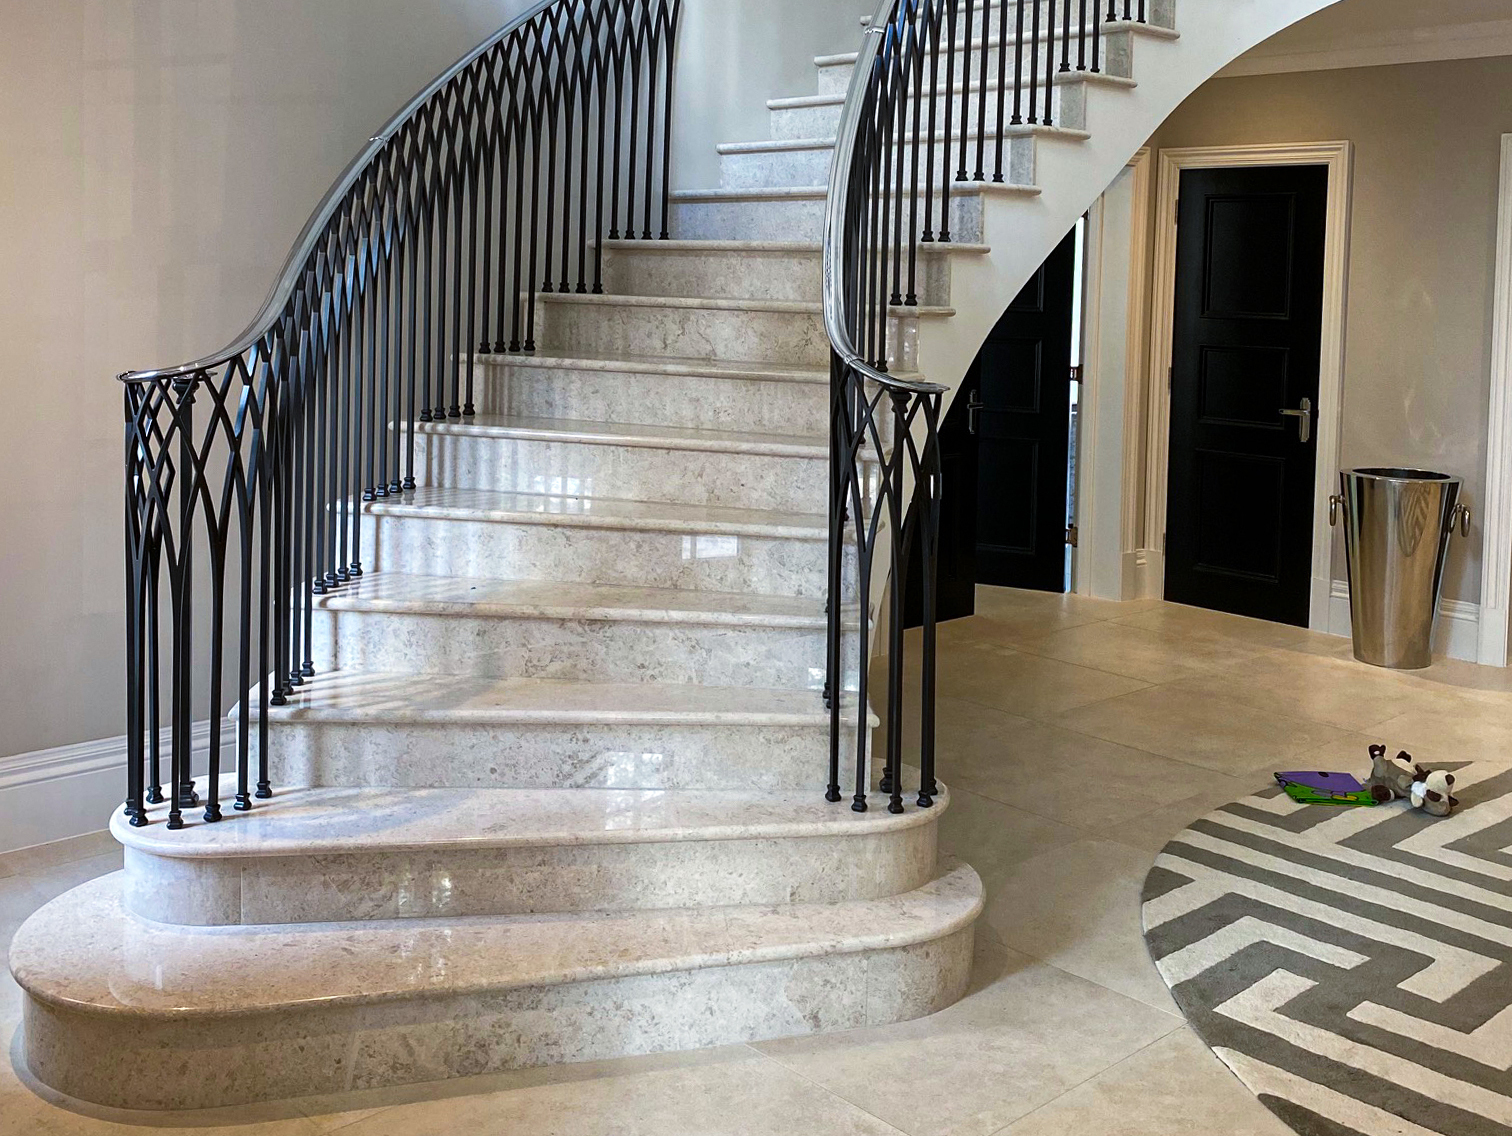 Curved staircase clad in marble with iron balustrades